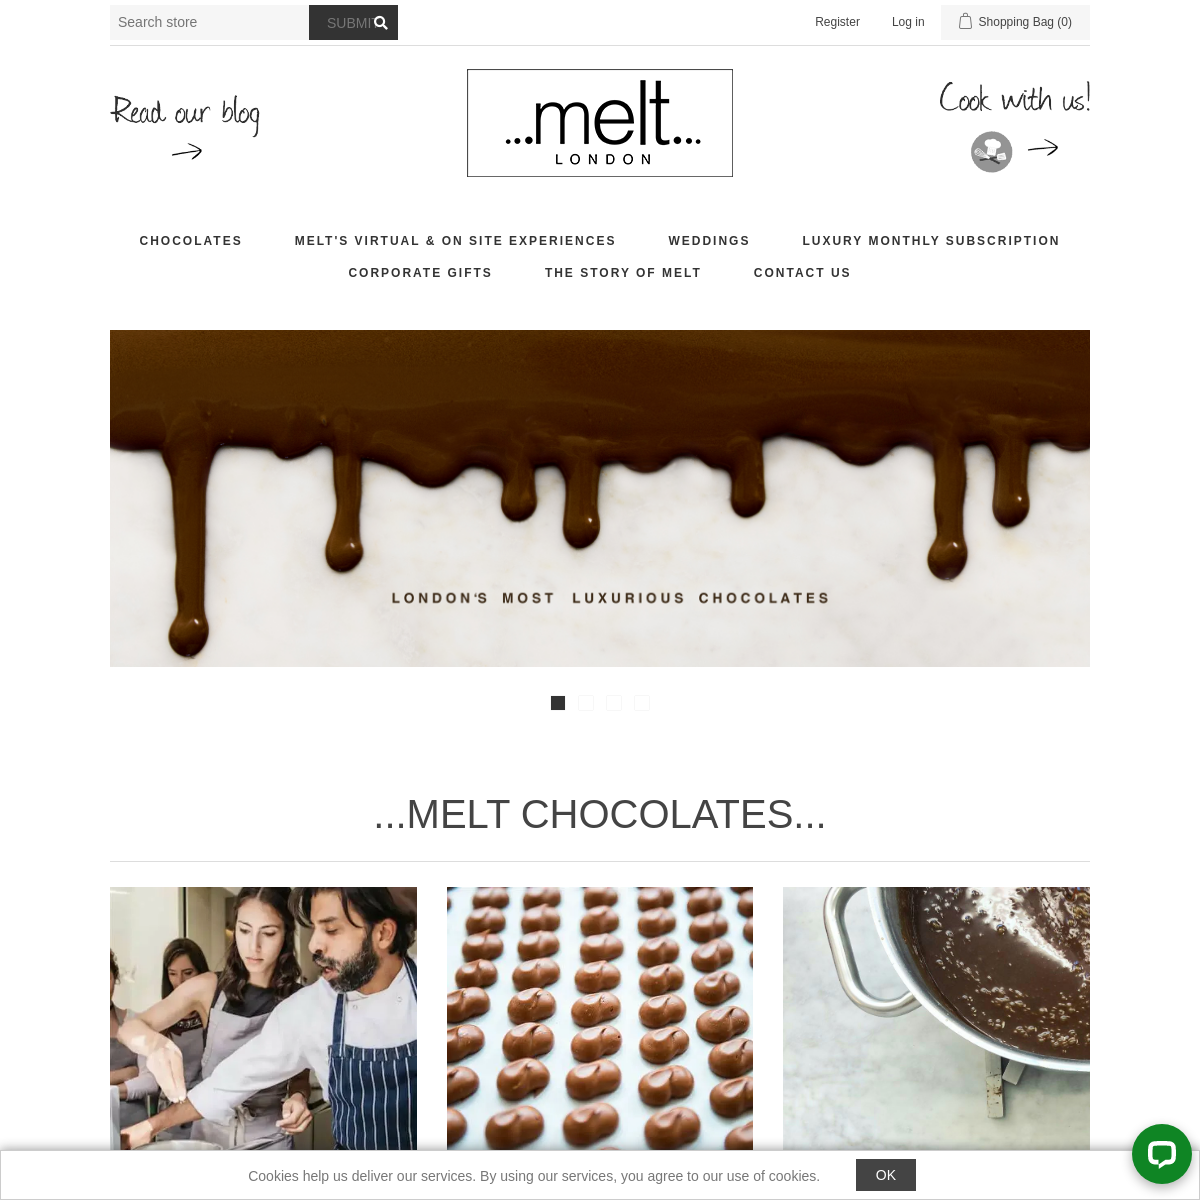 A complete backup of meltchocolates.com